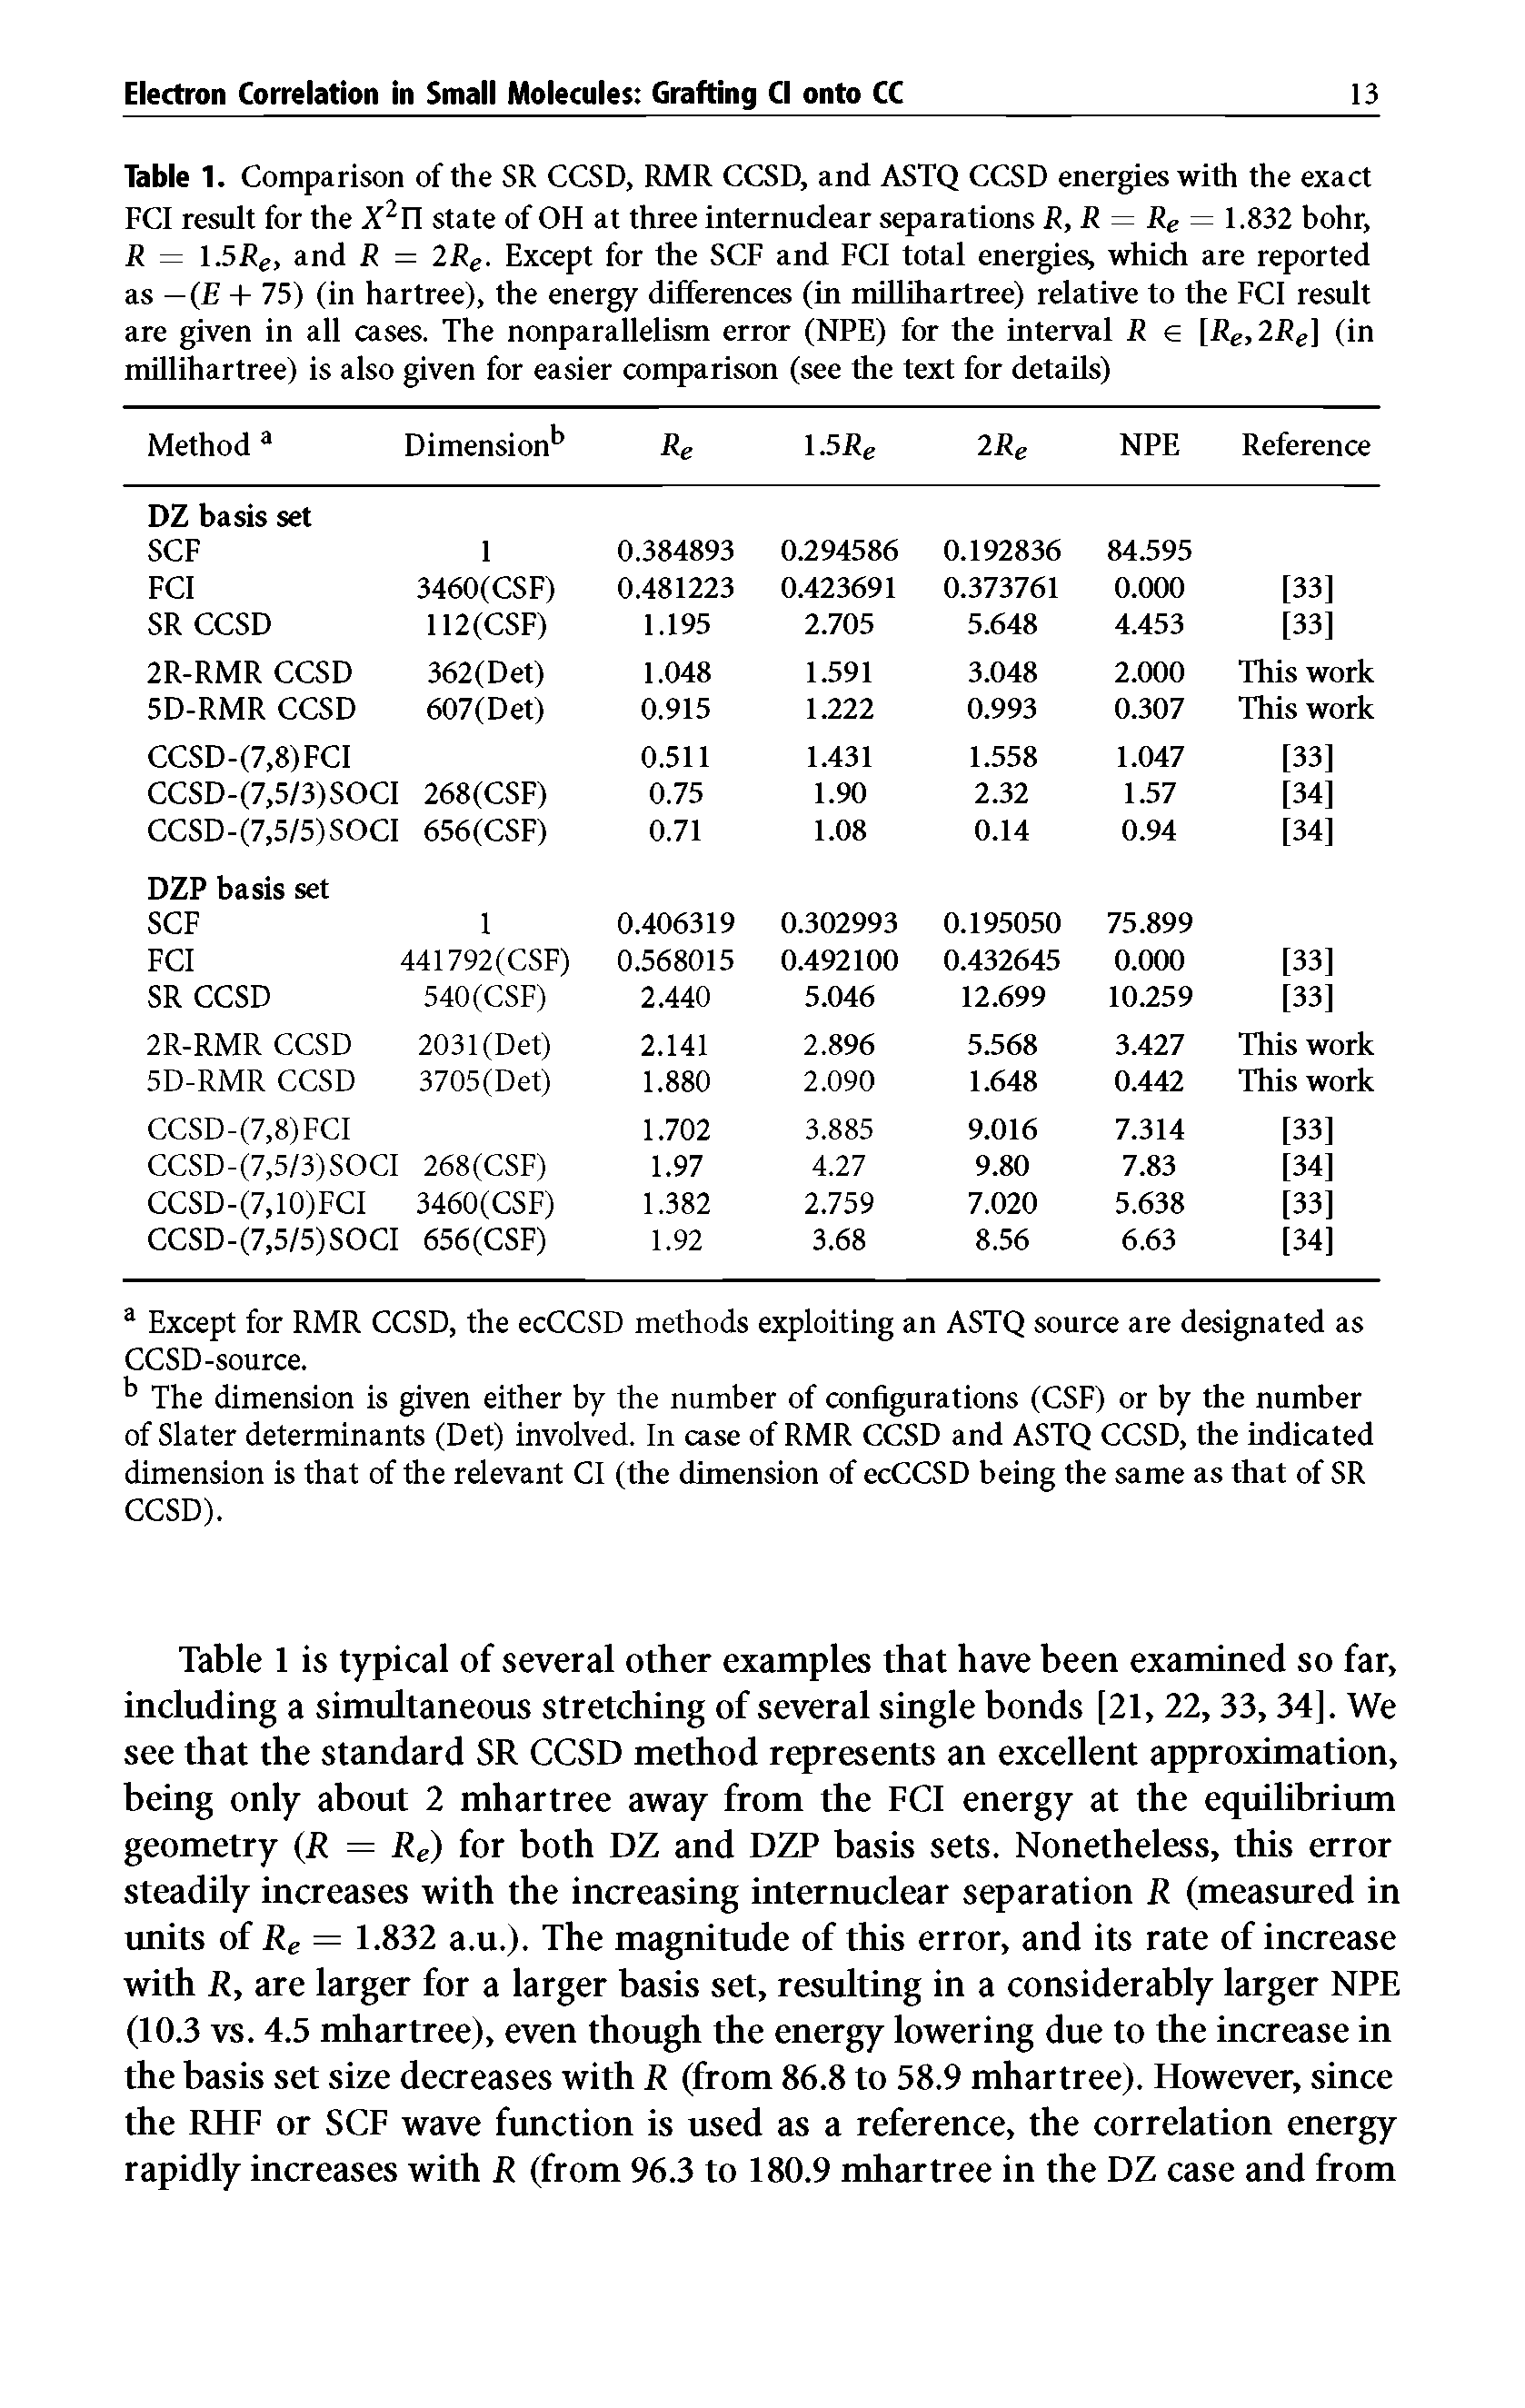 Table 1. Comparison of the SR CCSD, RMR CCSD, and ASTQ CCSD energies with the exact FCI result for the X2If state of OH at three internudear separations R, R = Re = 1.832 bohr, R = l.5Re> and R = 2Re. Except for the SCF and FCI total energies, which are reported as — (E + 75) (in hartree), the energy differences (in millihartree) relative to the FCI result are given in all cases. The nonparallelism error (NPE) for the interval R e [Re, 2Re] (in millihartree) is also given for easier comparison (see the text for details) ...